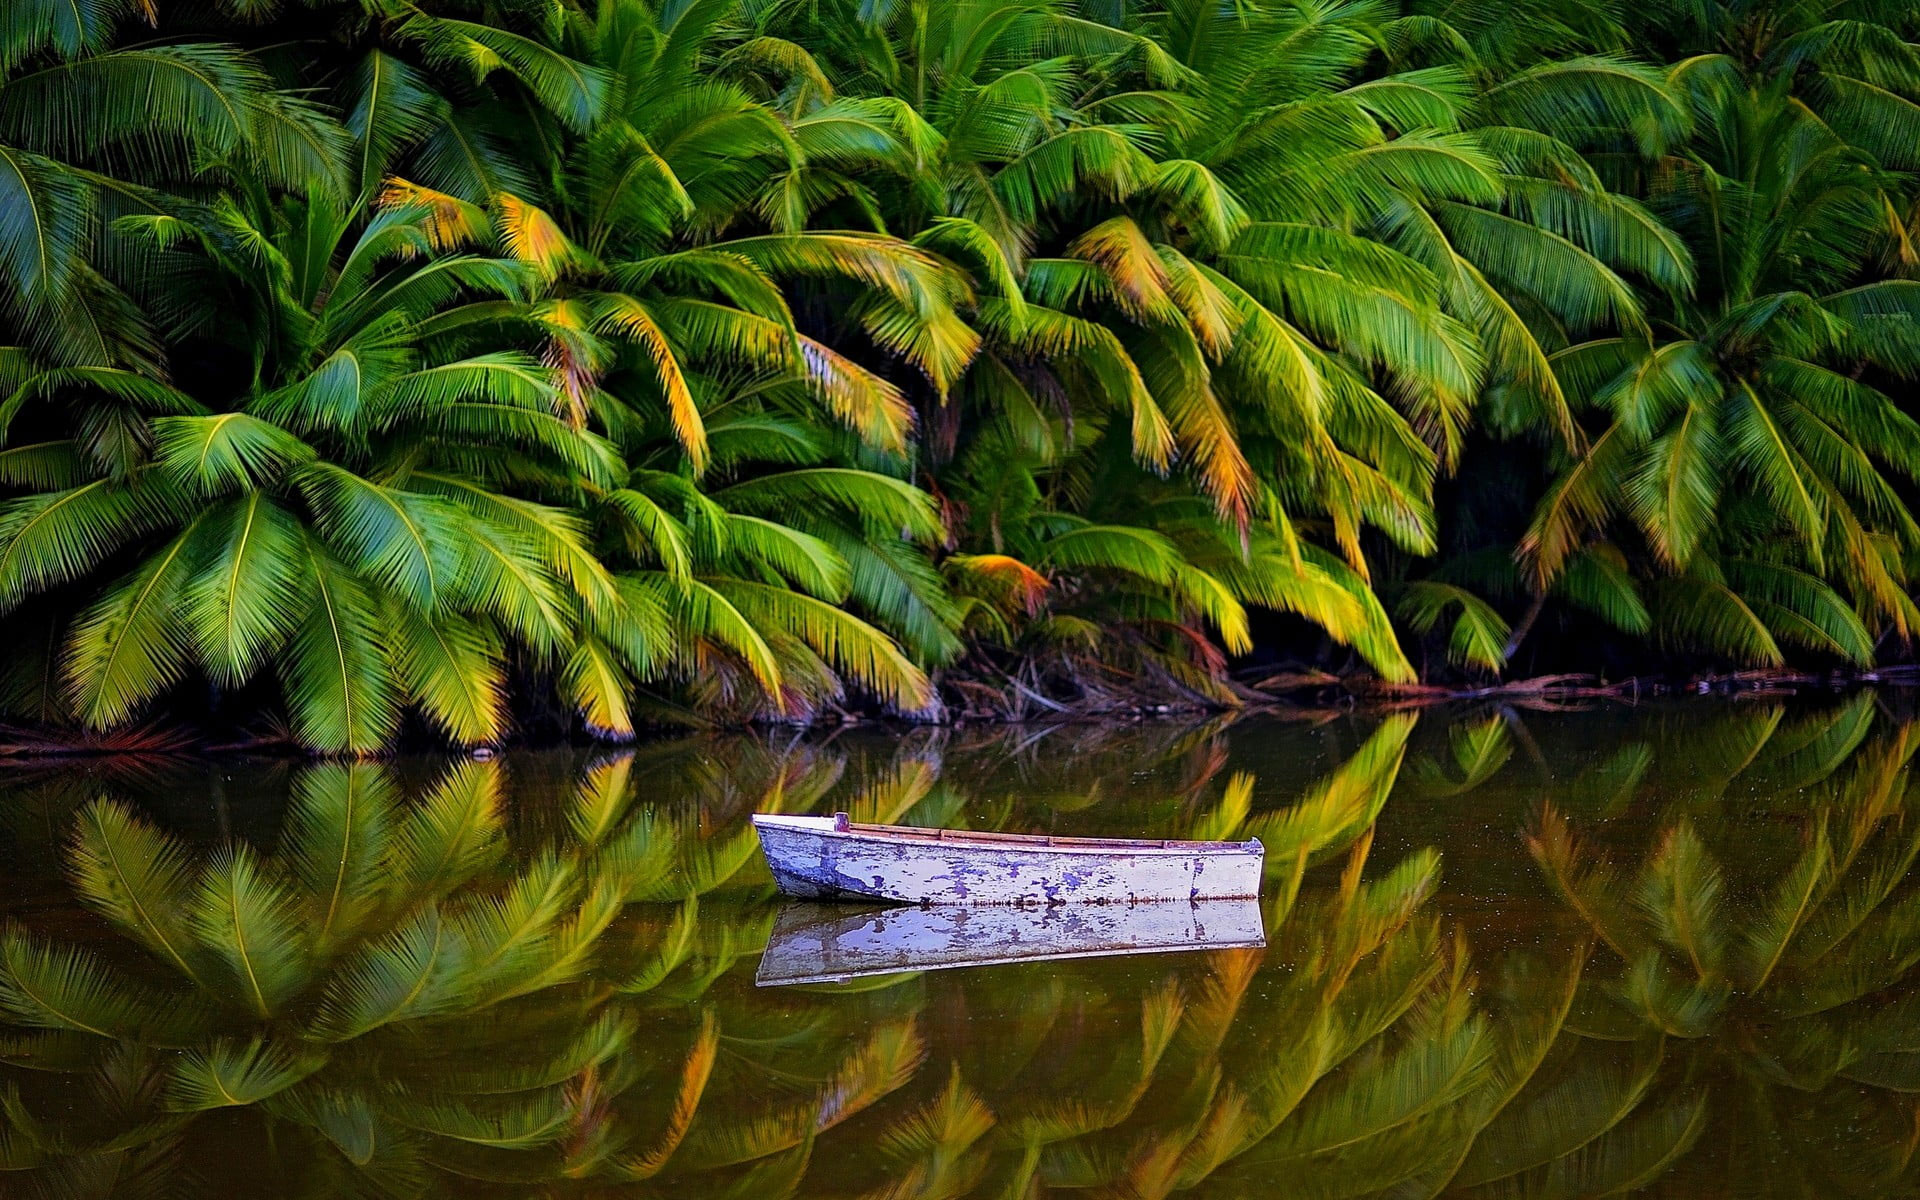 White boat on body of water wallpaper, nature, landscape, palm trees, jungle